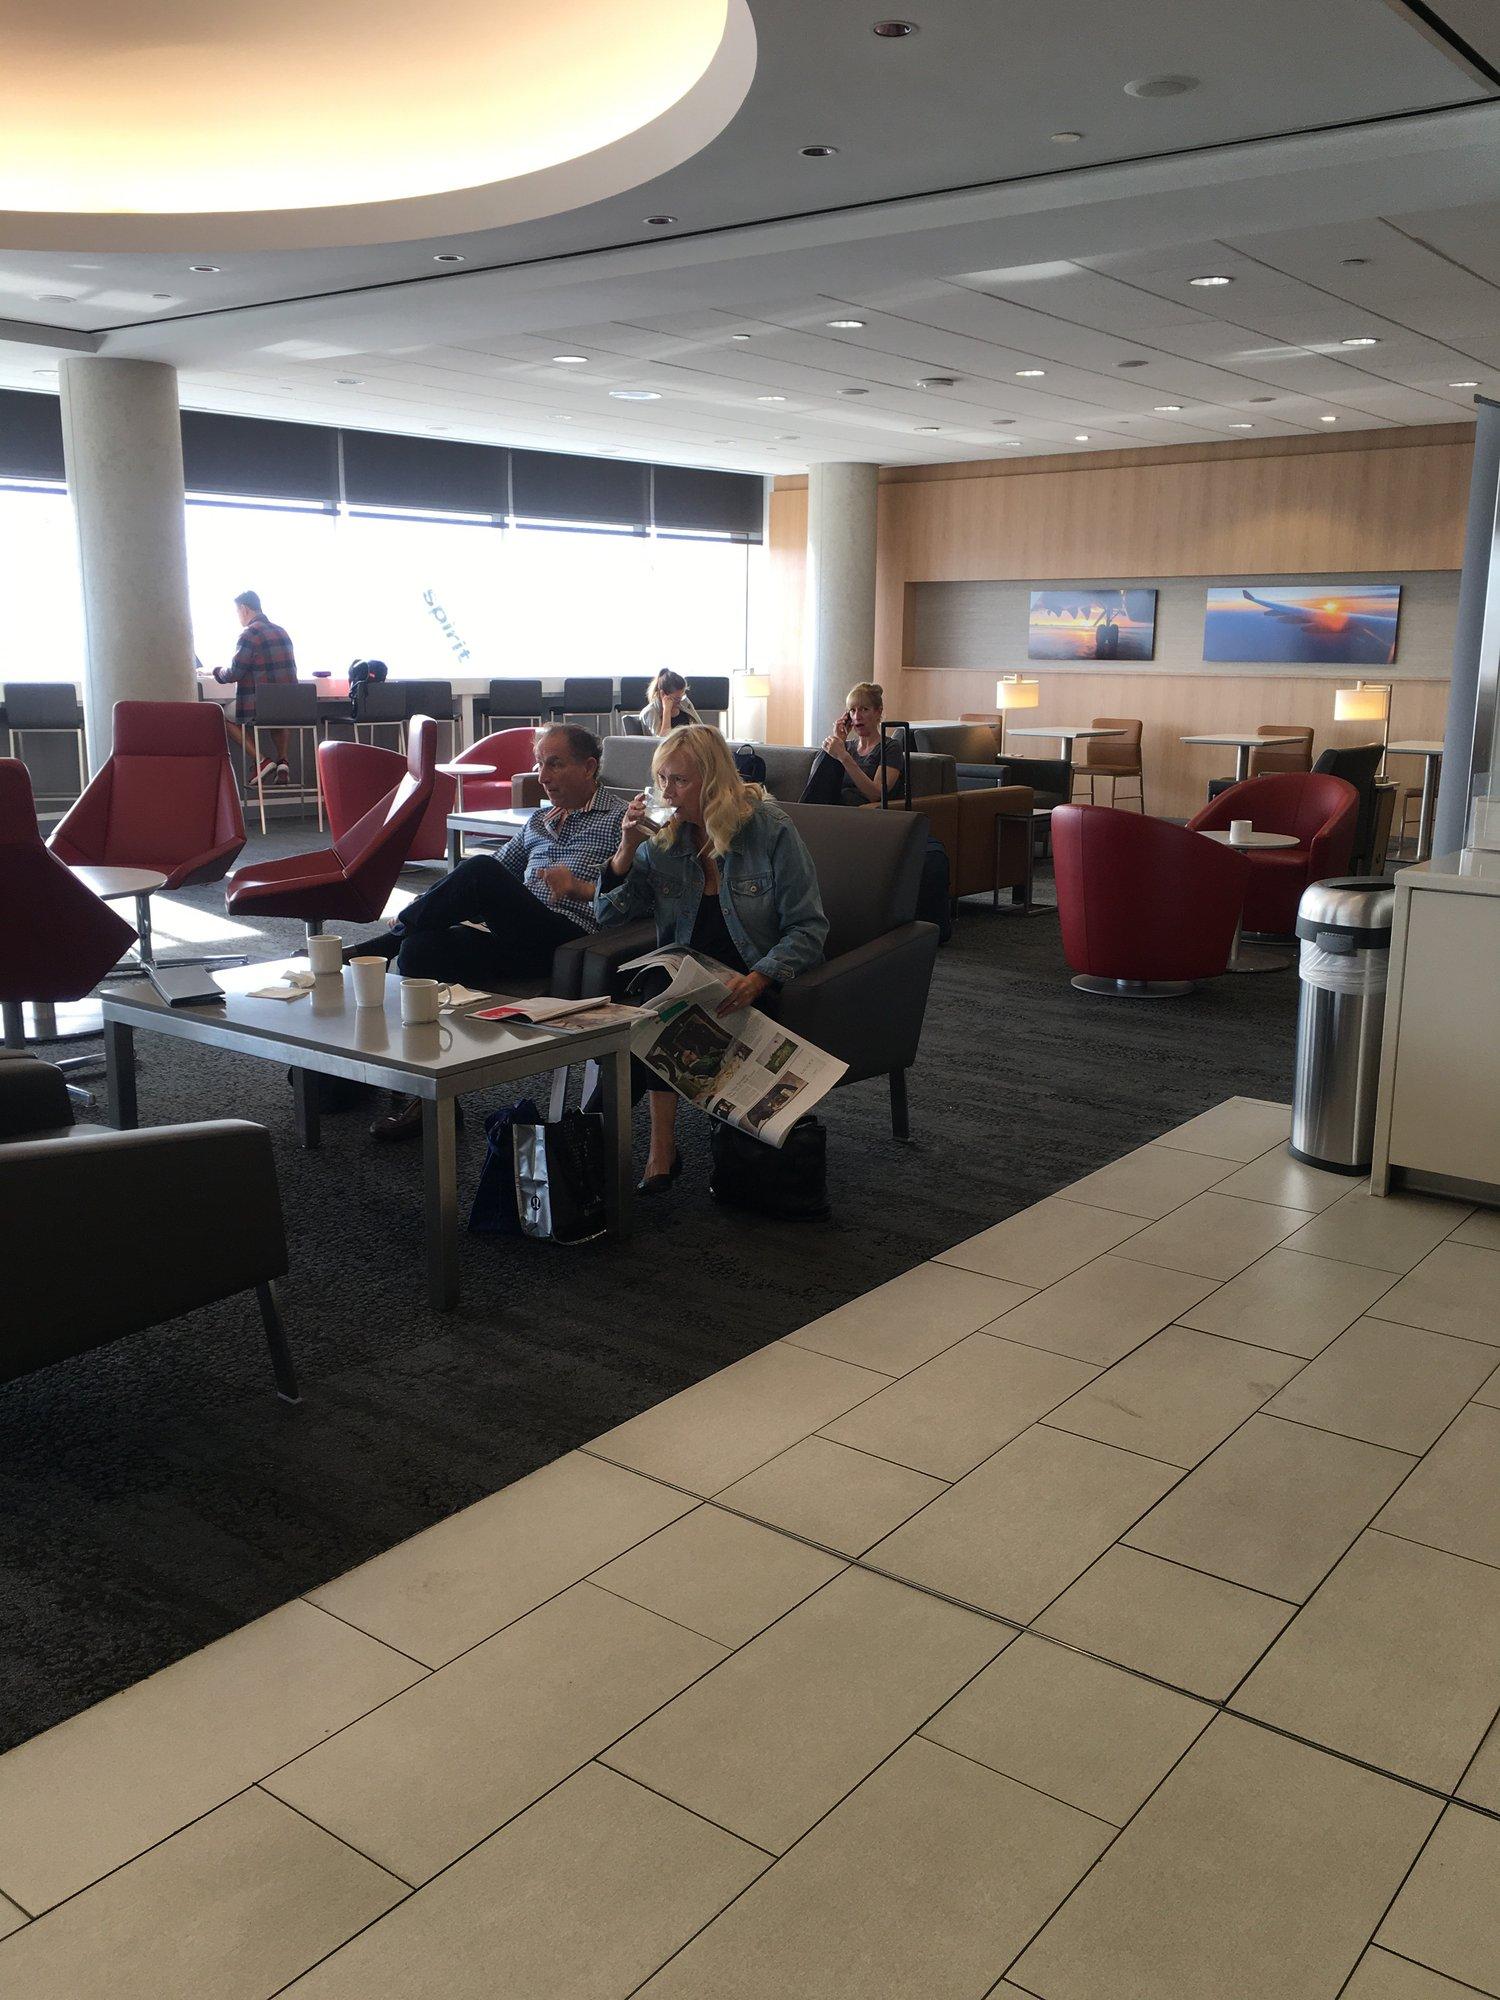 American Airlines Admirals Club image 28 of 38